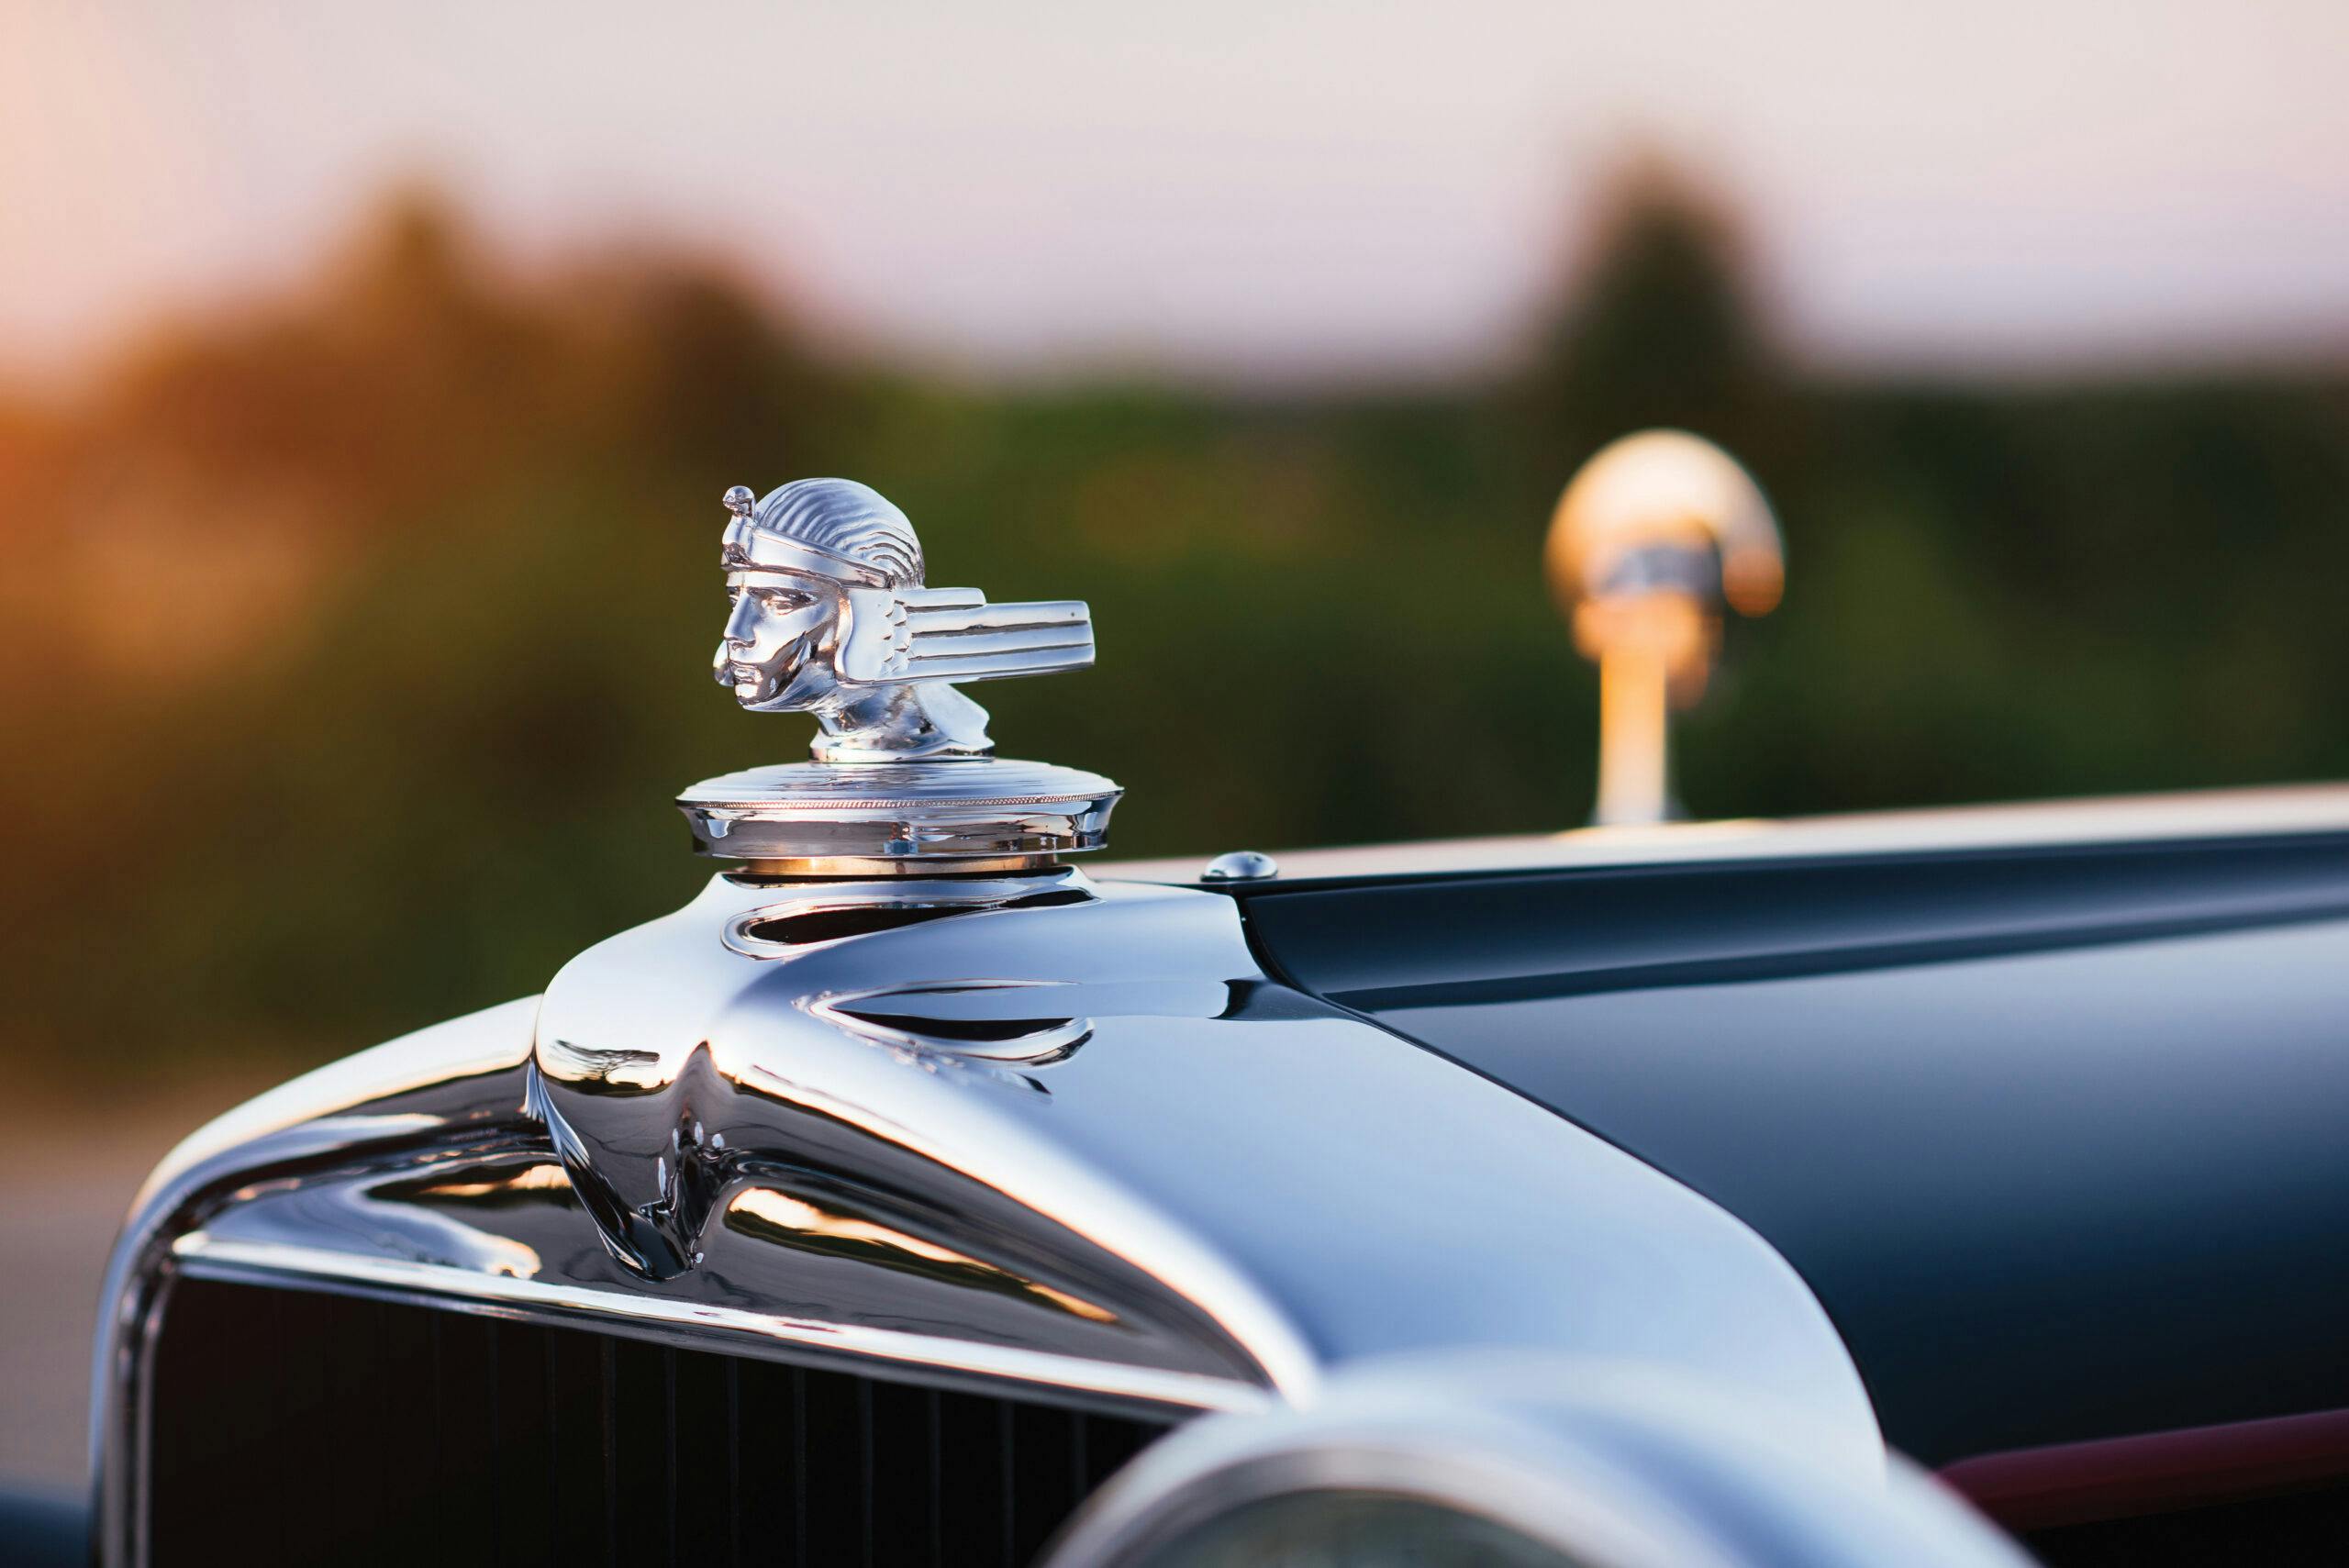 1929-Stutz-Model-M-Supercharged-Coupe-by-Lancefield hood ornament